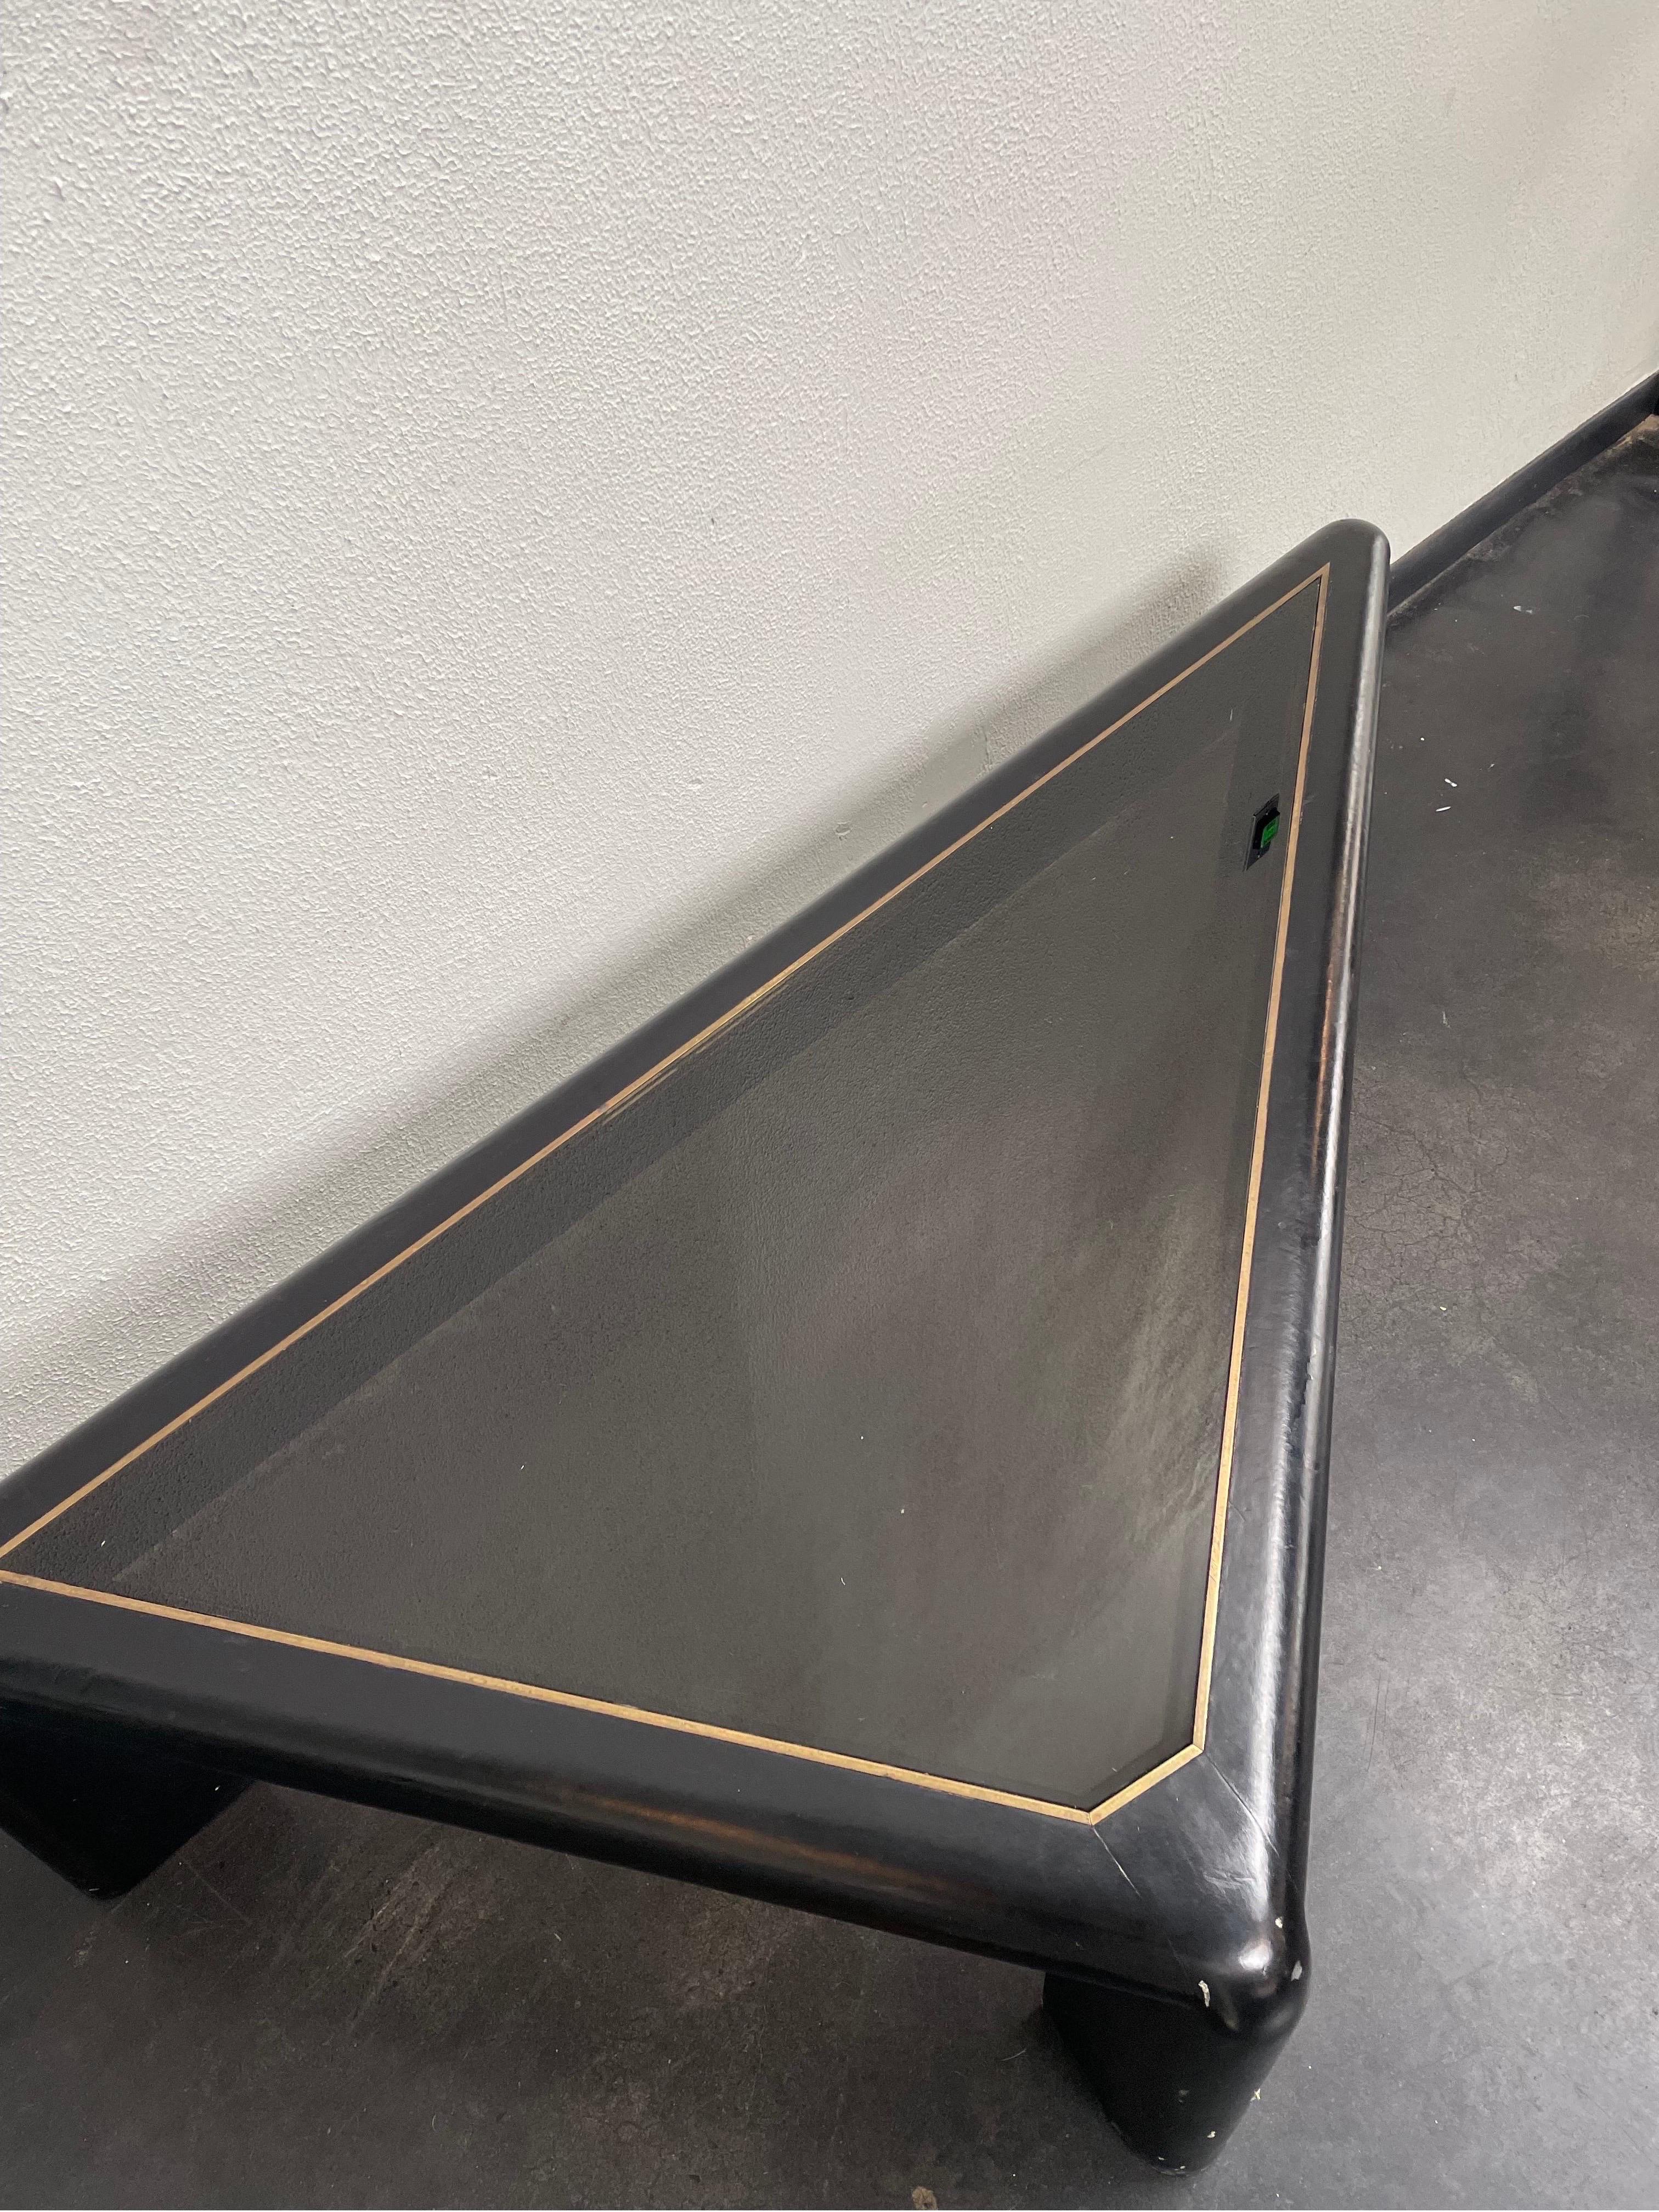 Vintage triangular coffee table encased in black leather and features a smoked glass inset.